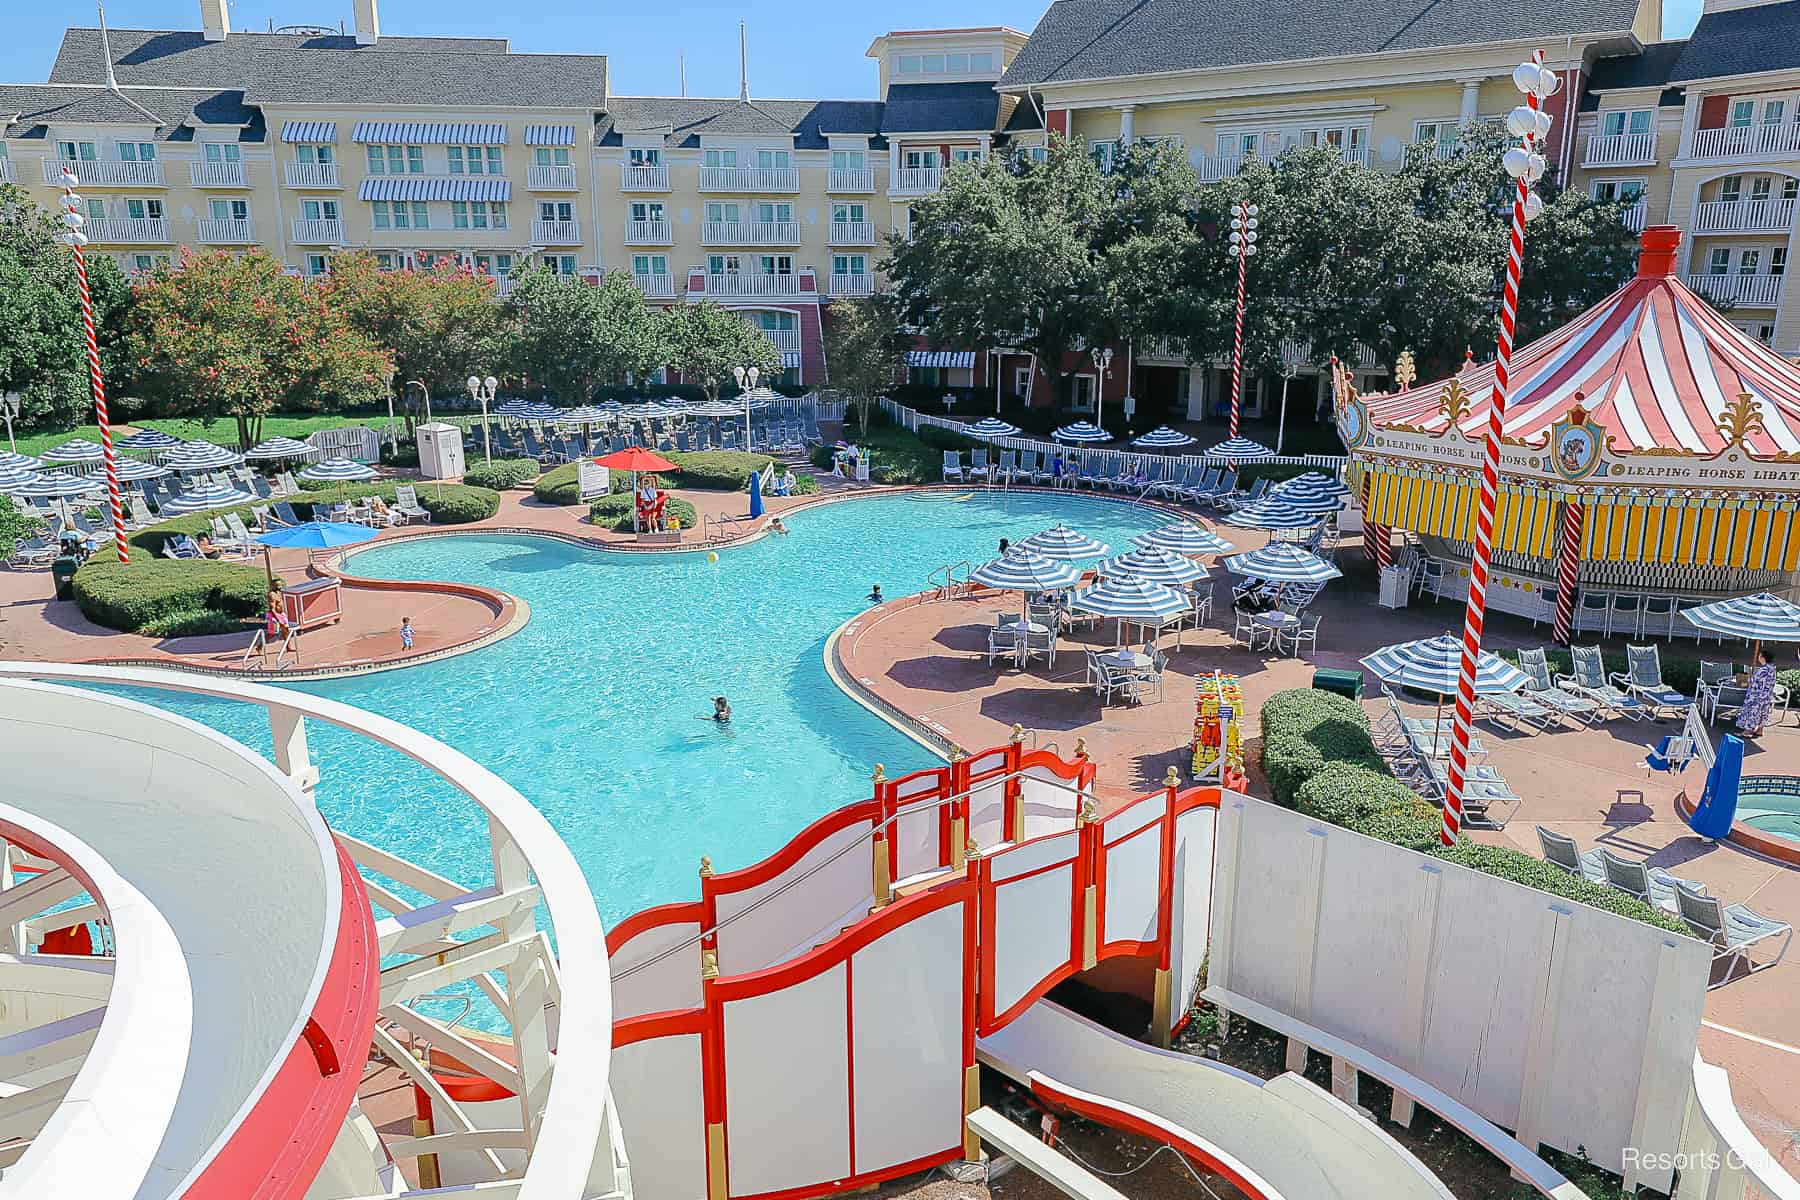 a view of the pool area from the top of the water slide platform 